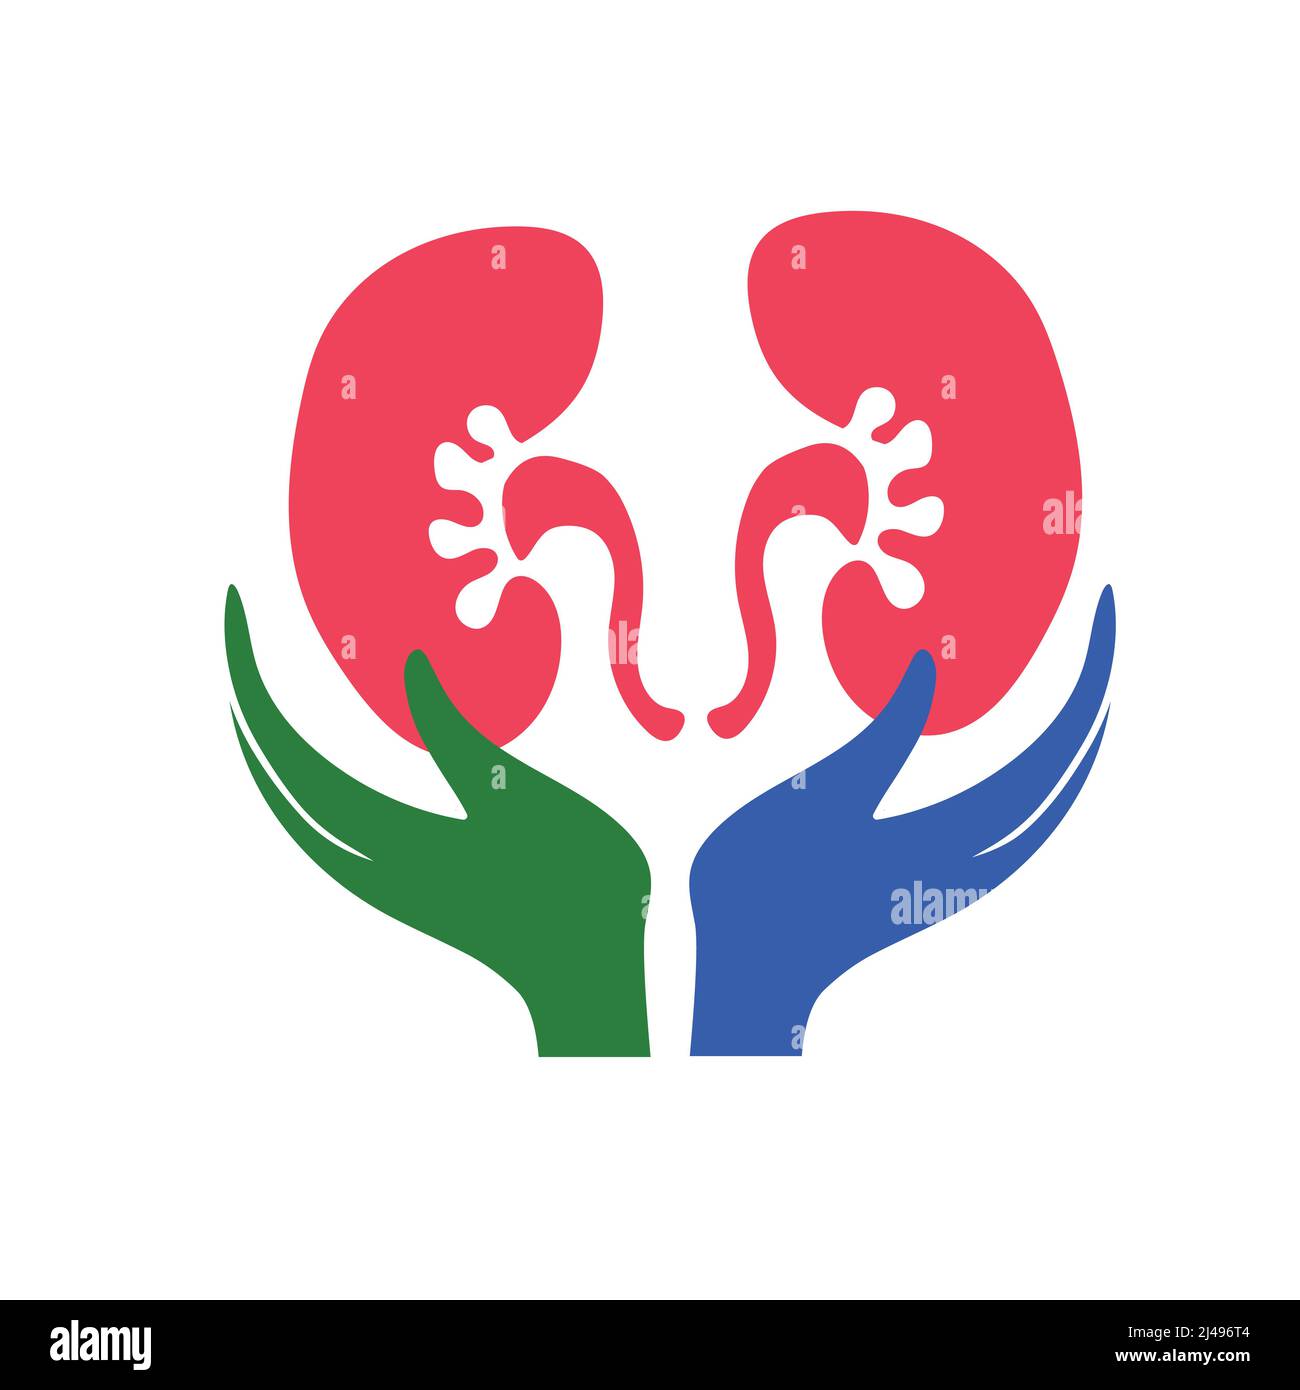 Kidney care logo icon isolated on white background Stock Vector